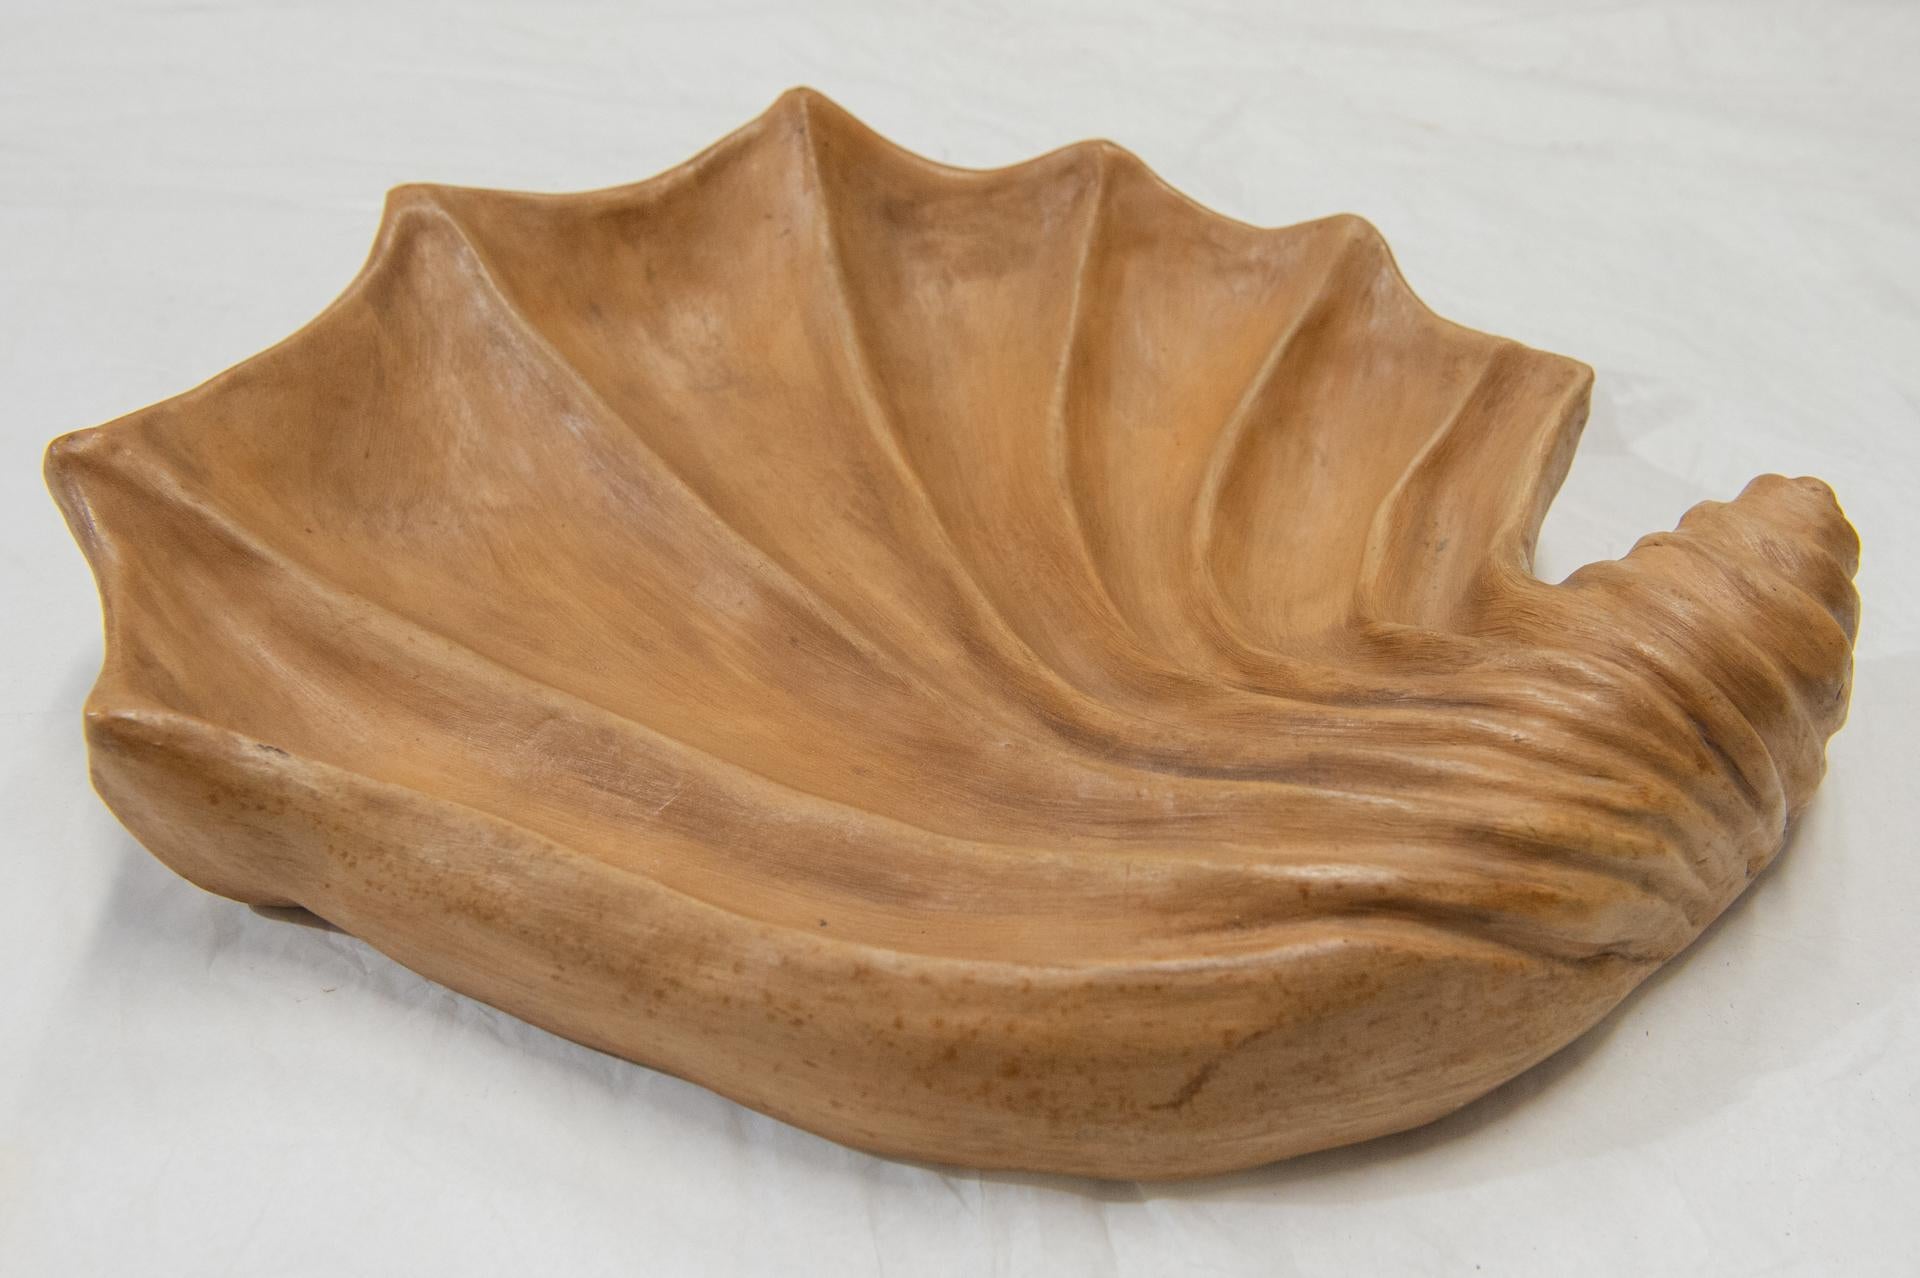 Hand-Crafted Terracotta Plate Modeled by Hand in the Shape of a Shell For Sale